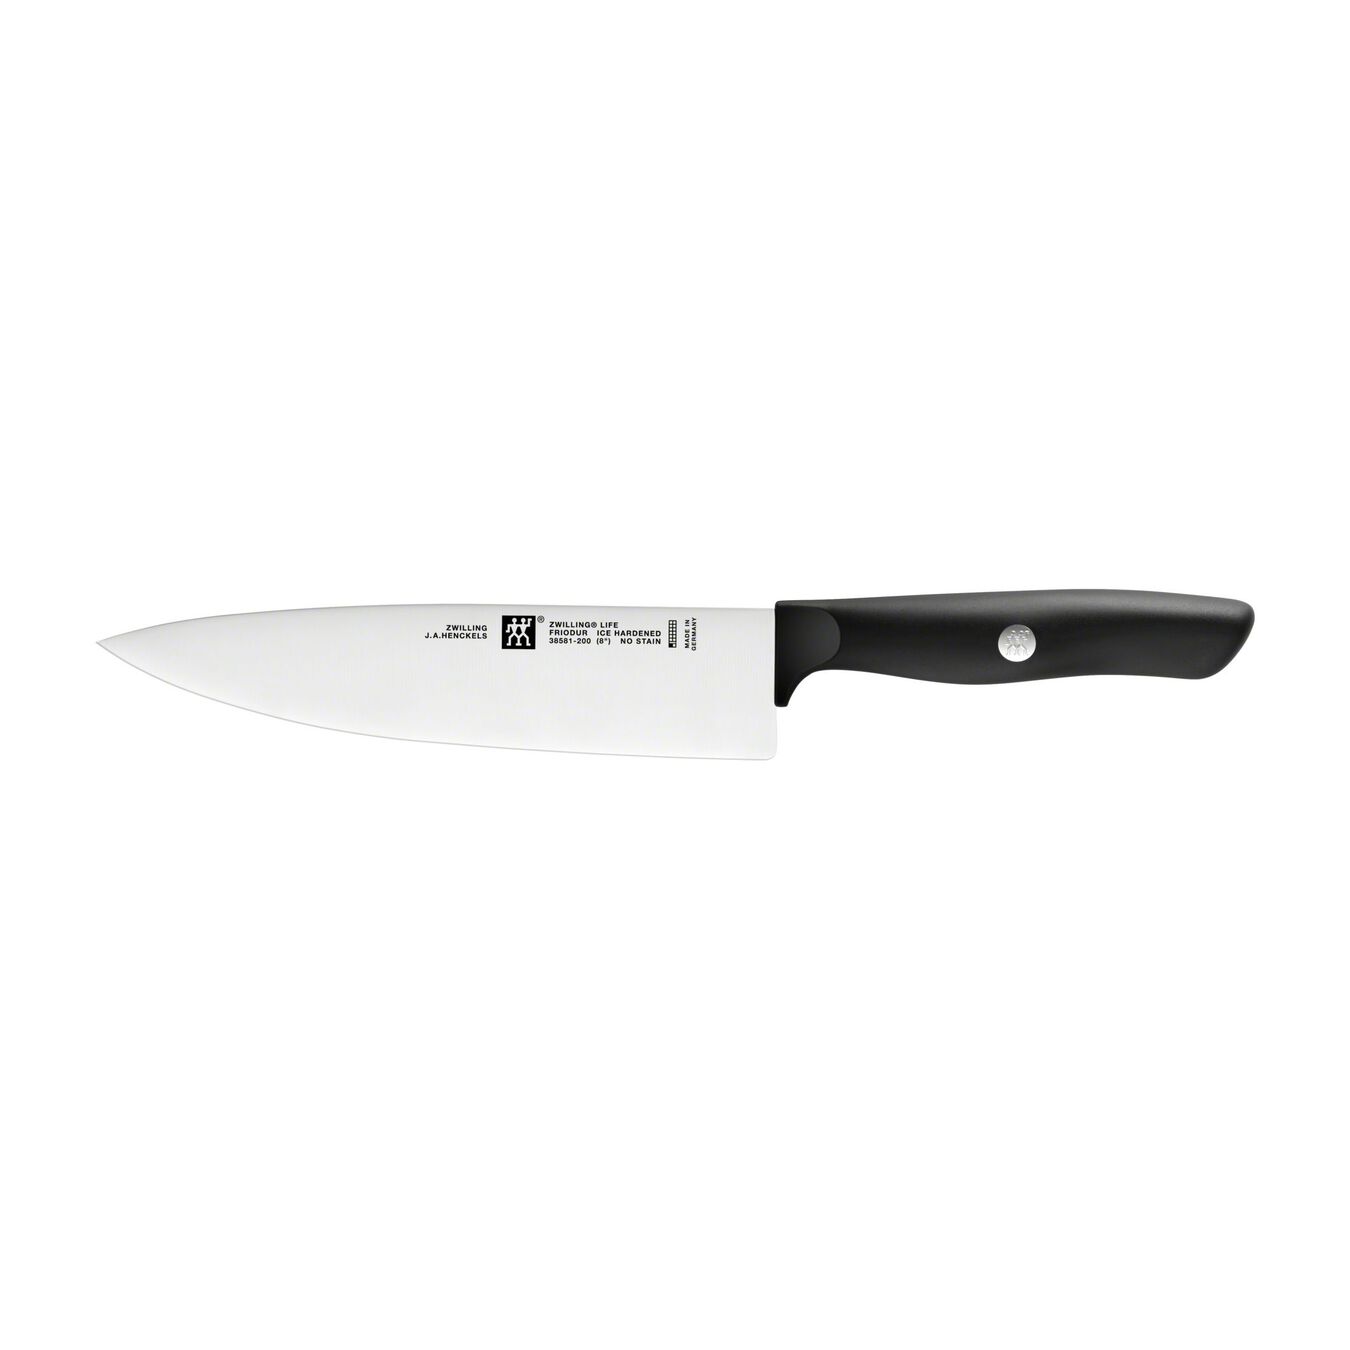 8-inch, Chef's knife - Visual Imperfections,,large 4